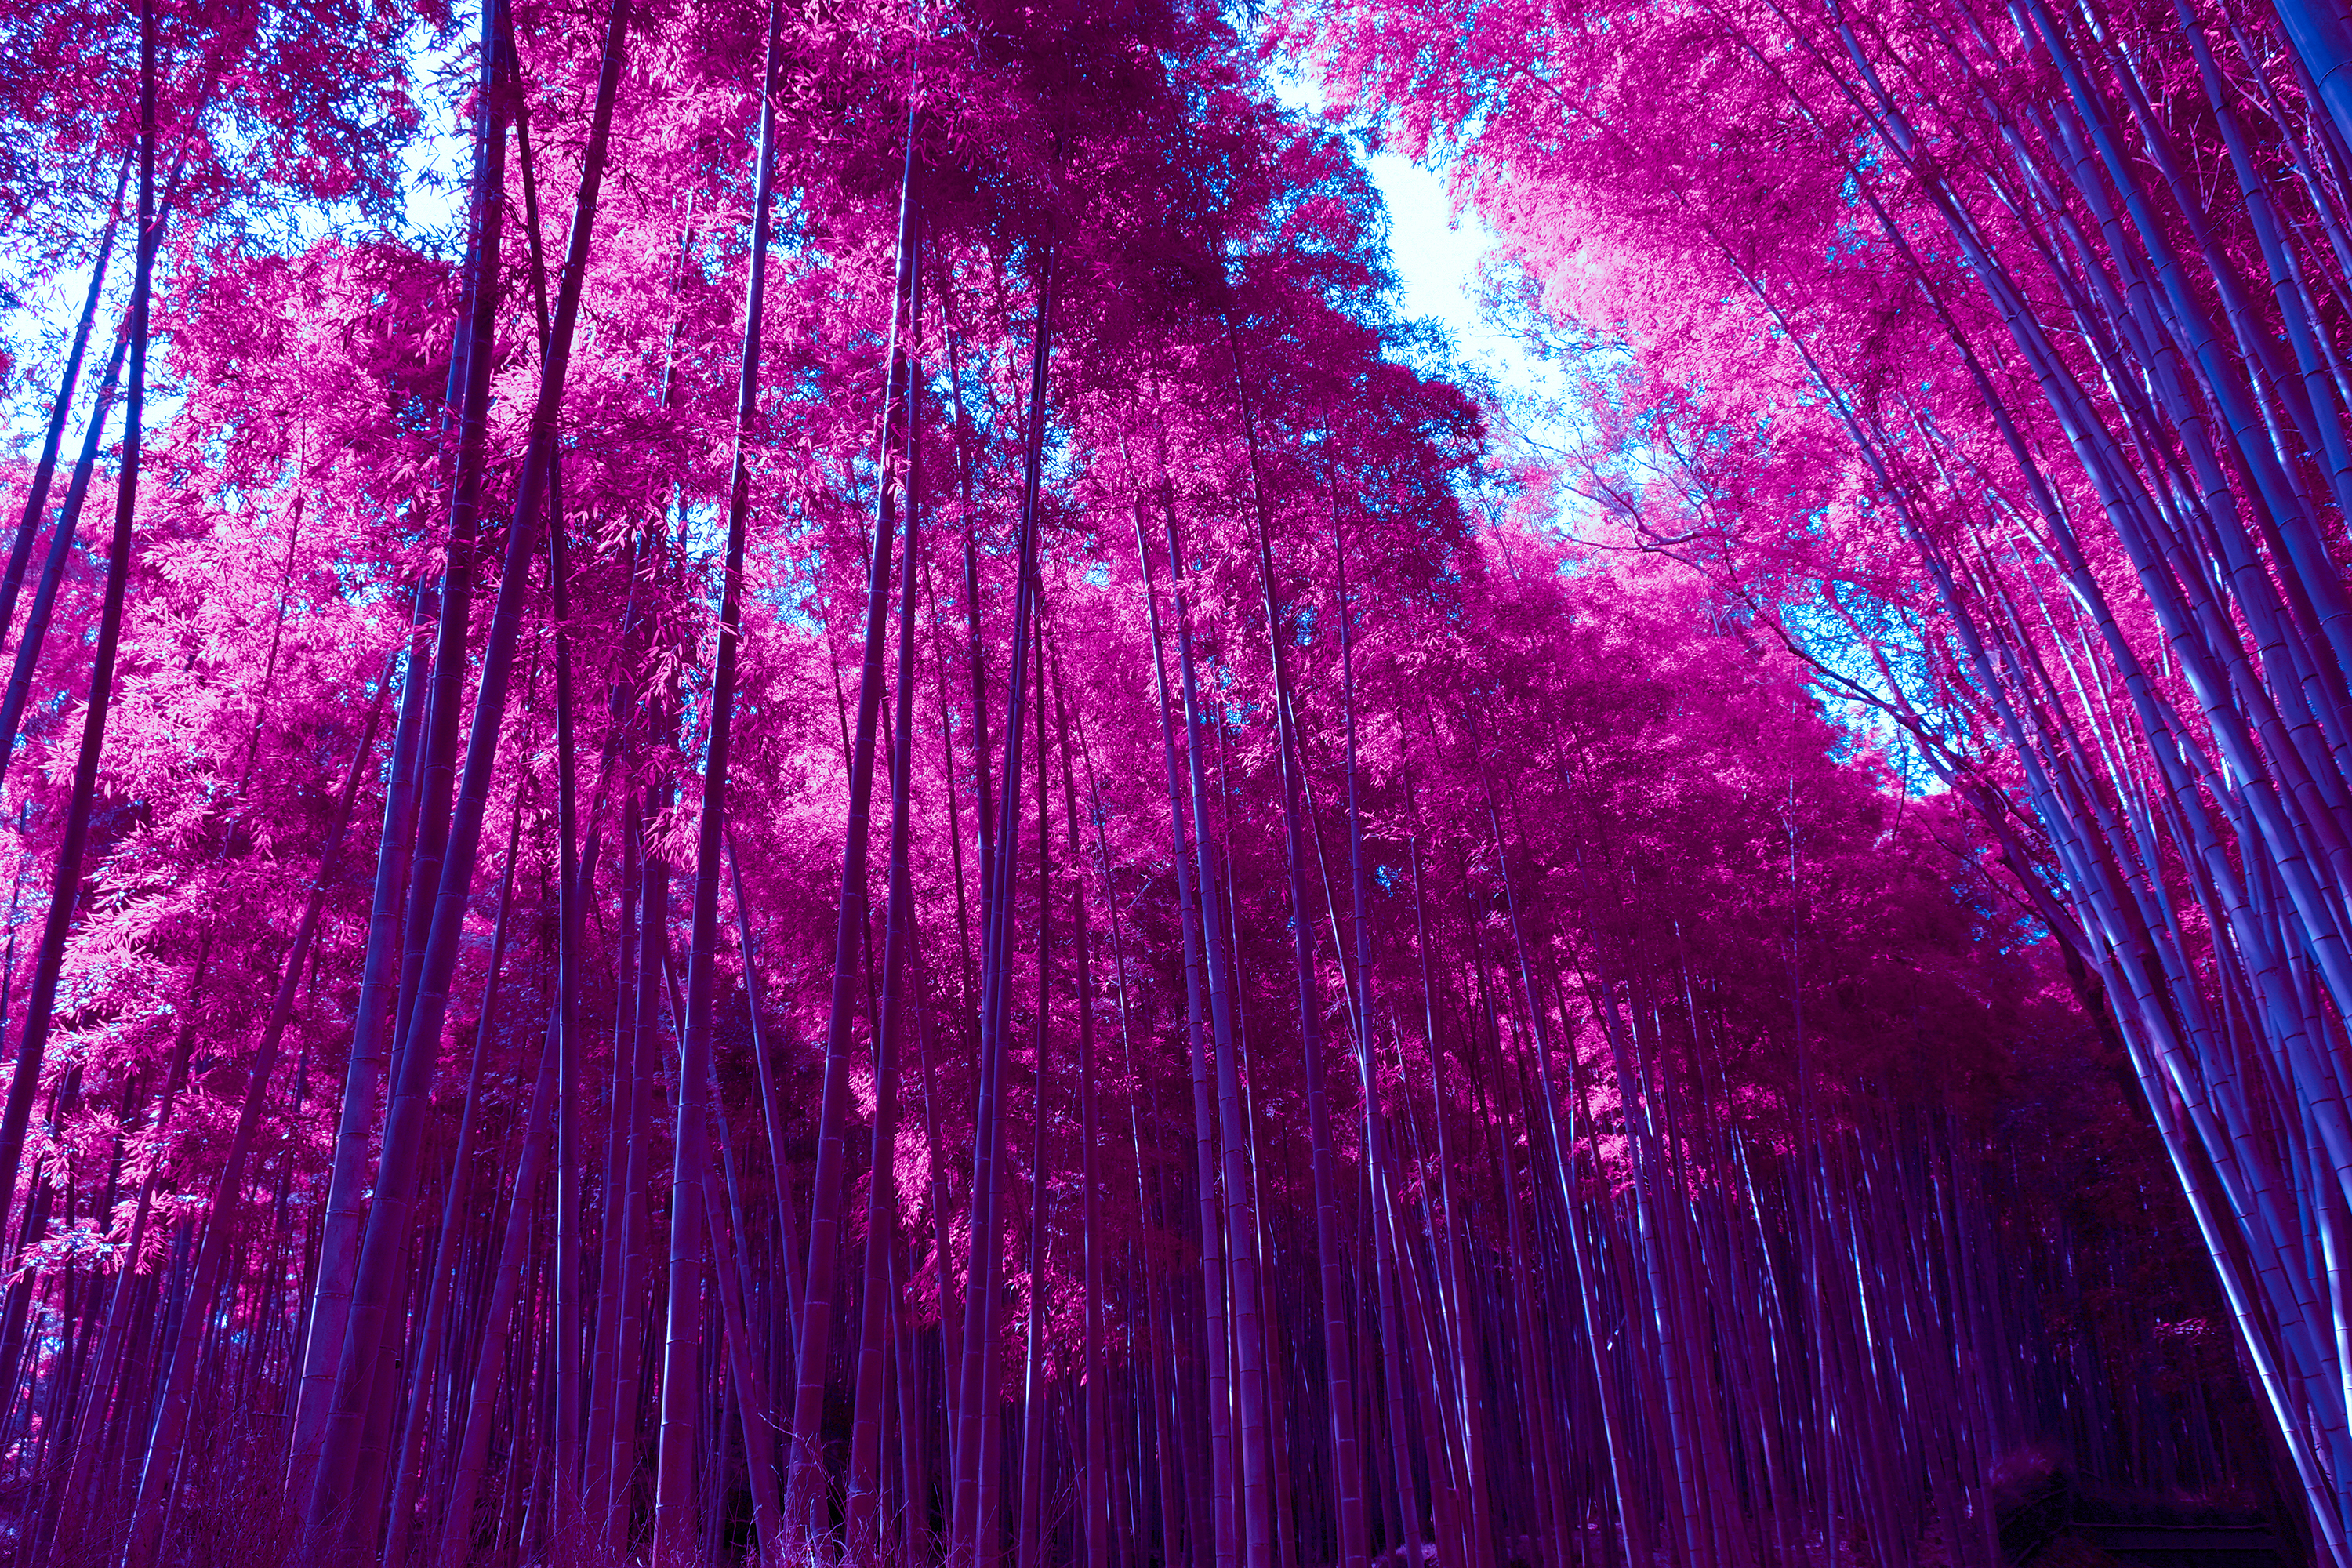 27900 Bamboo Forest Wallpaper Images Stock Photos  Vectors  Shutterstock